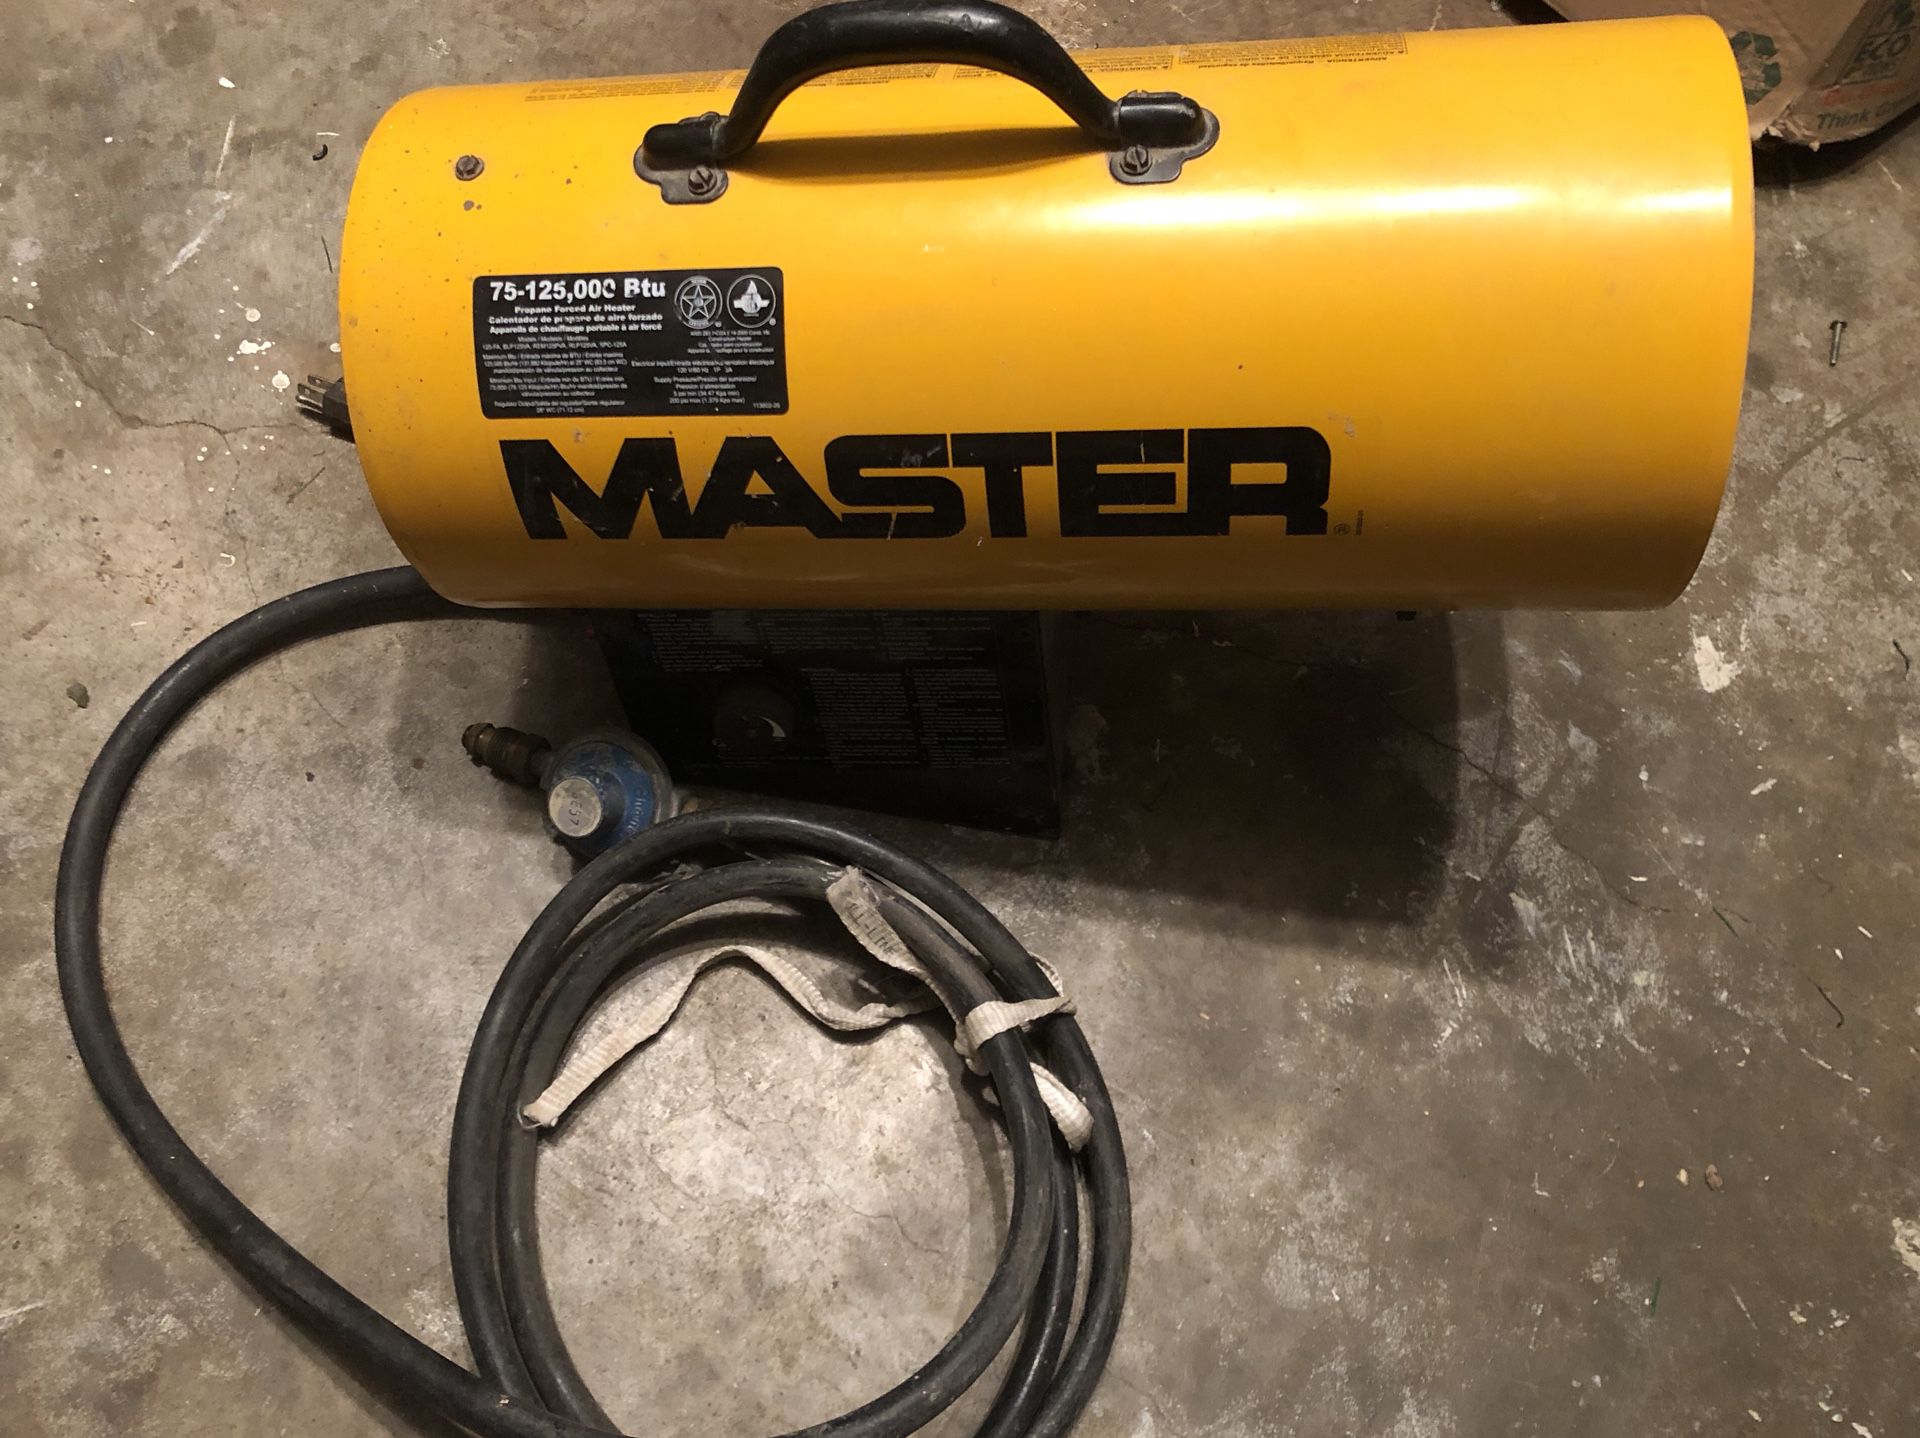 Master propane 75-125,000 BTU Forced Air Heater with Thermostat